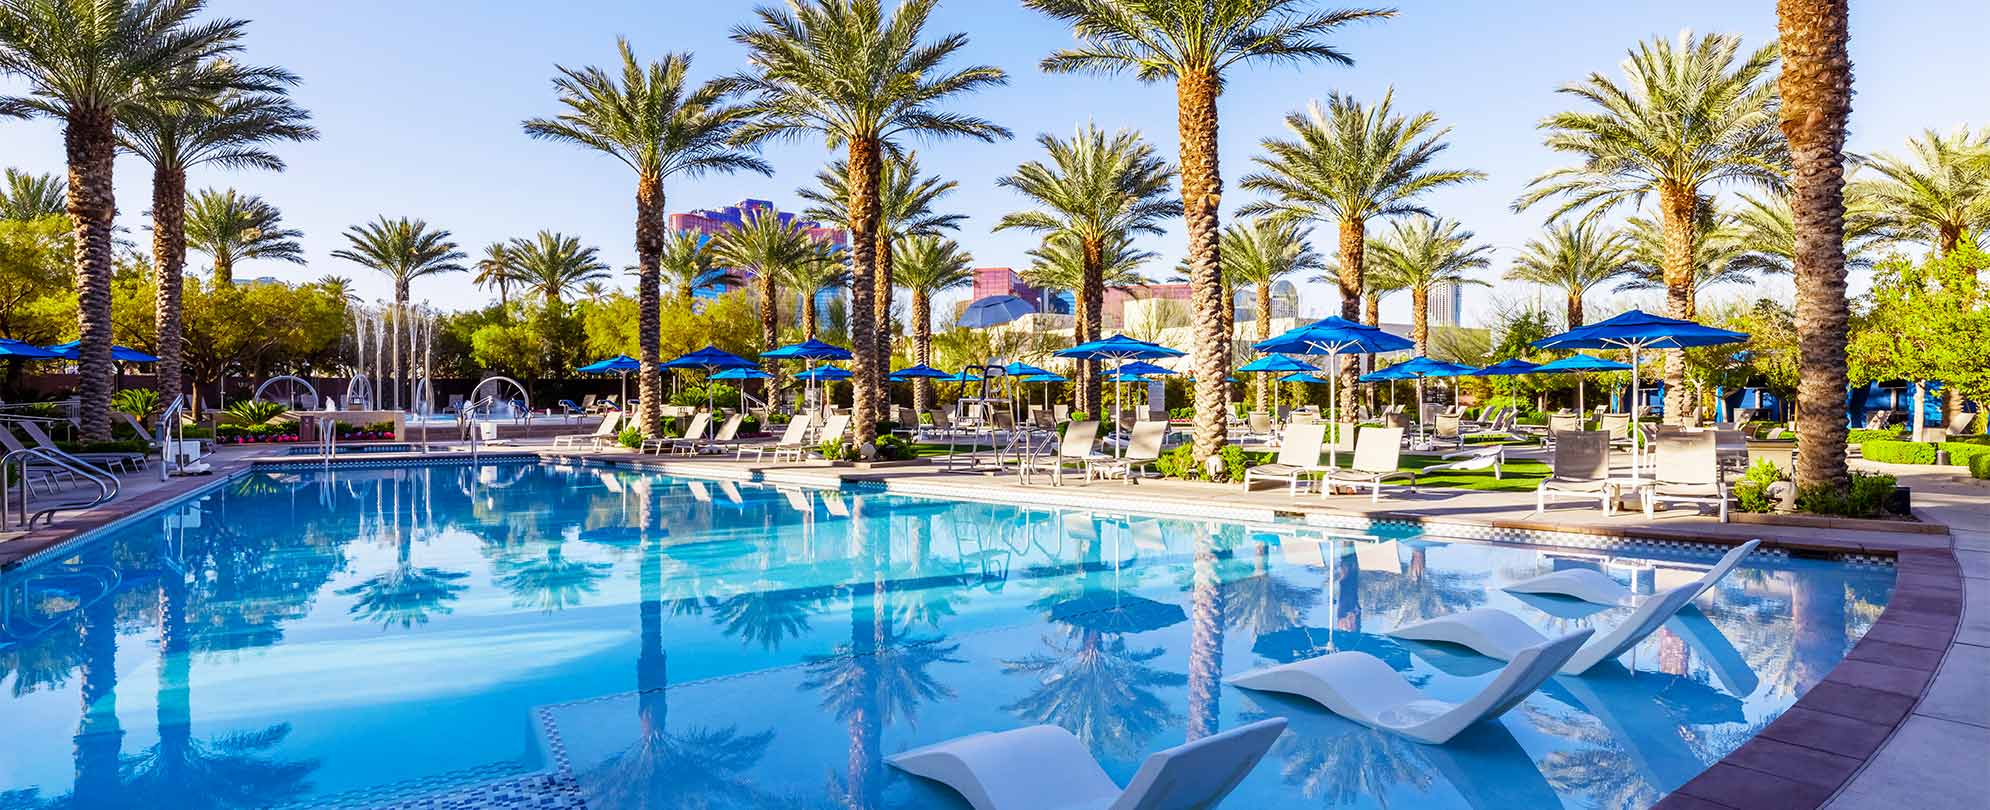 Lounge chairs and palm trees around the pool at Margaritaville Vacation Club by Wyndham - Desert Blue in Las Vegas, NV.